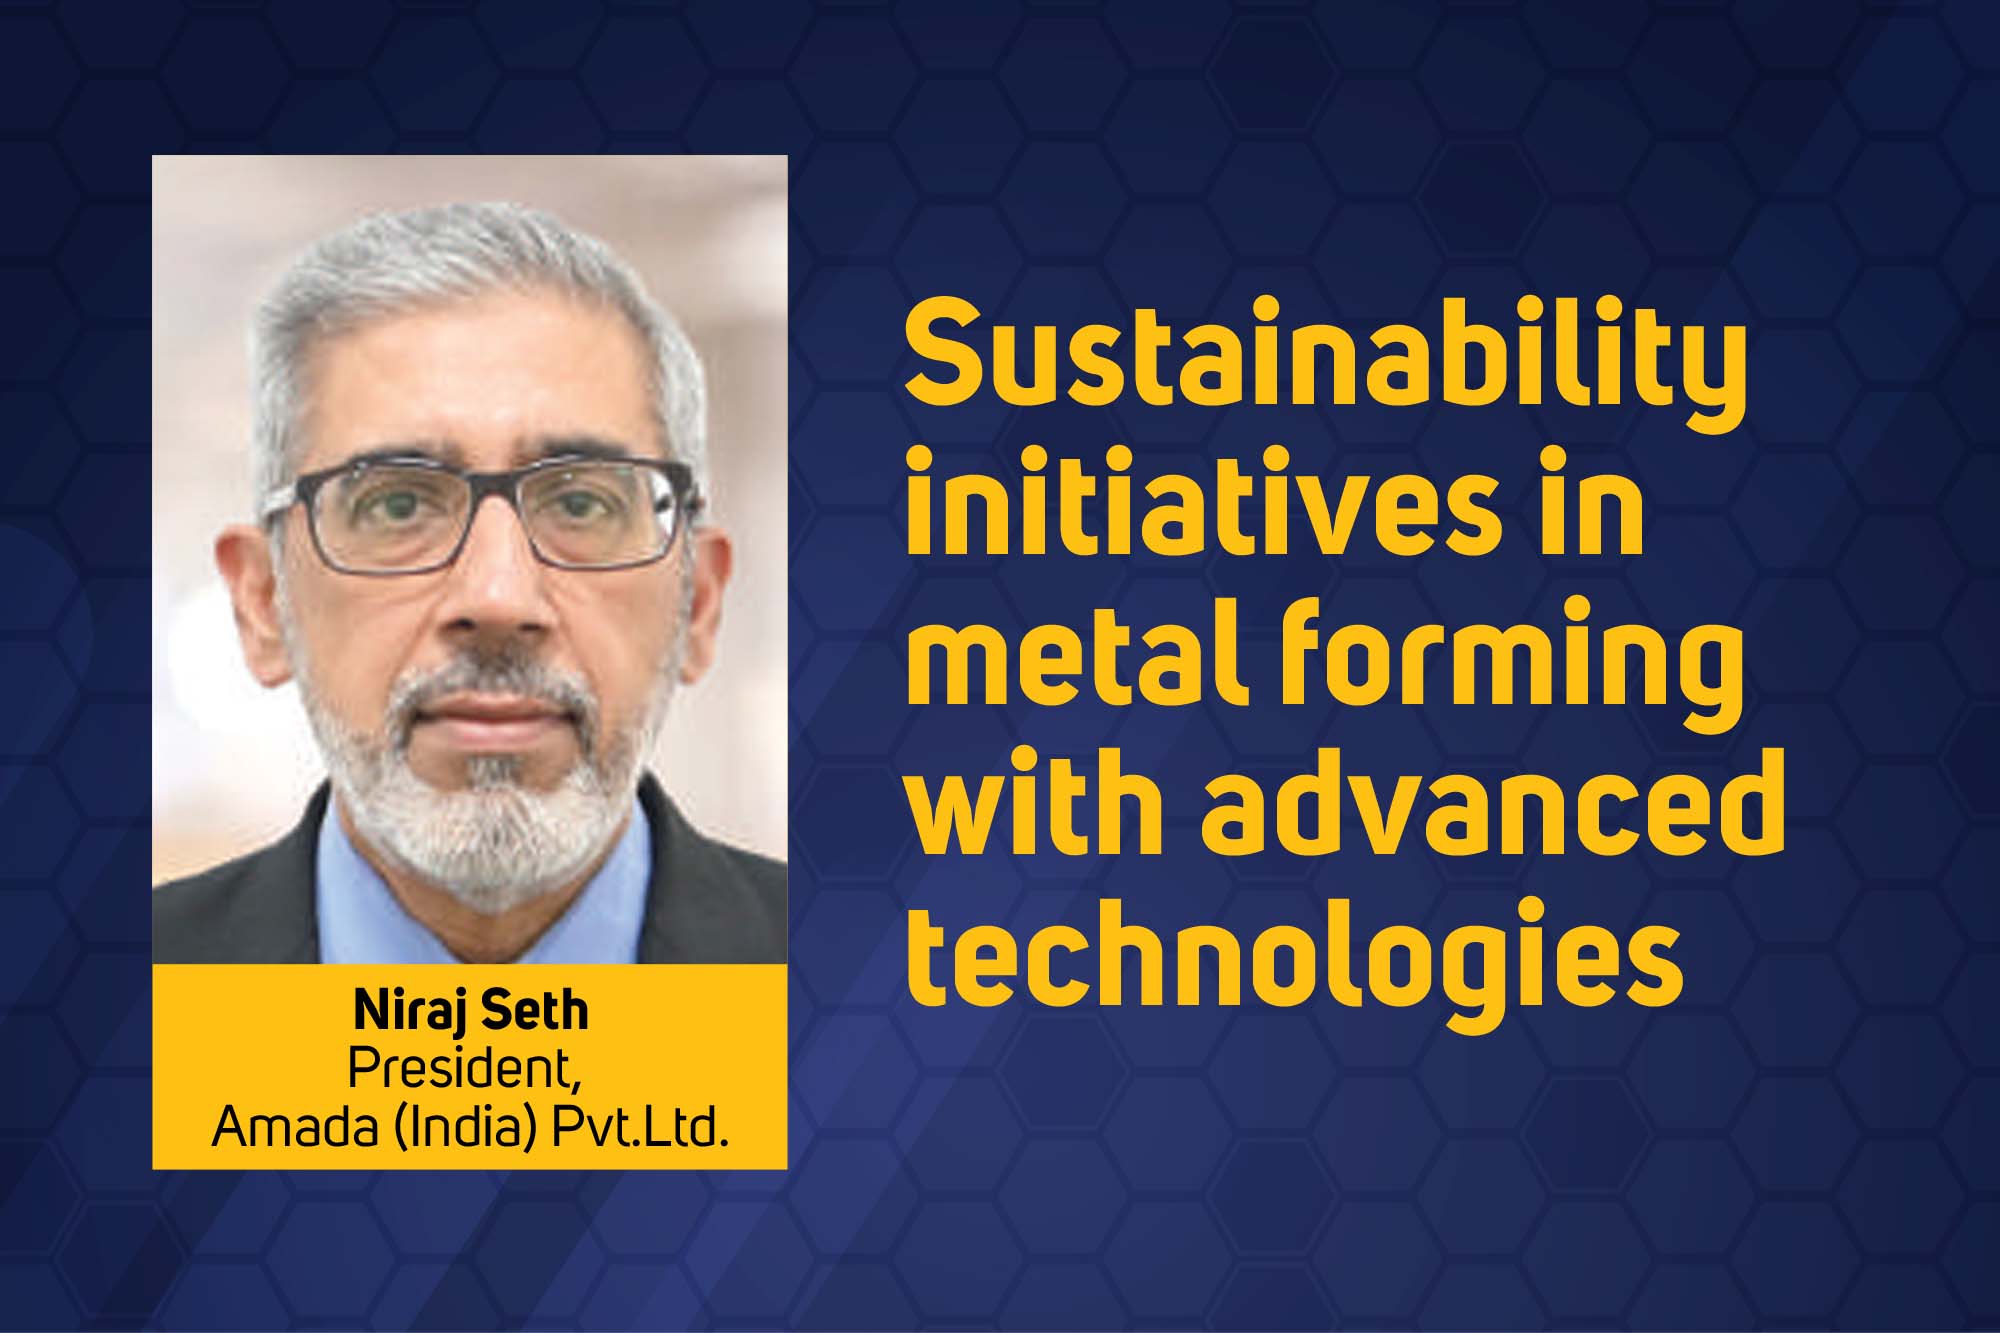 Sustainability initiatives in metal forming with advanced technologies